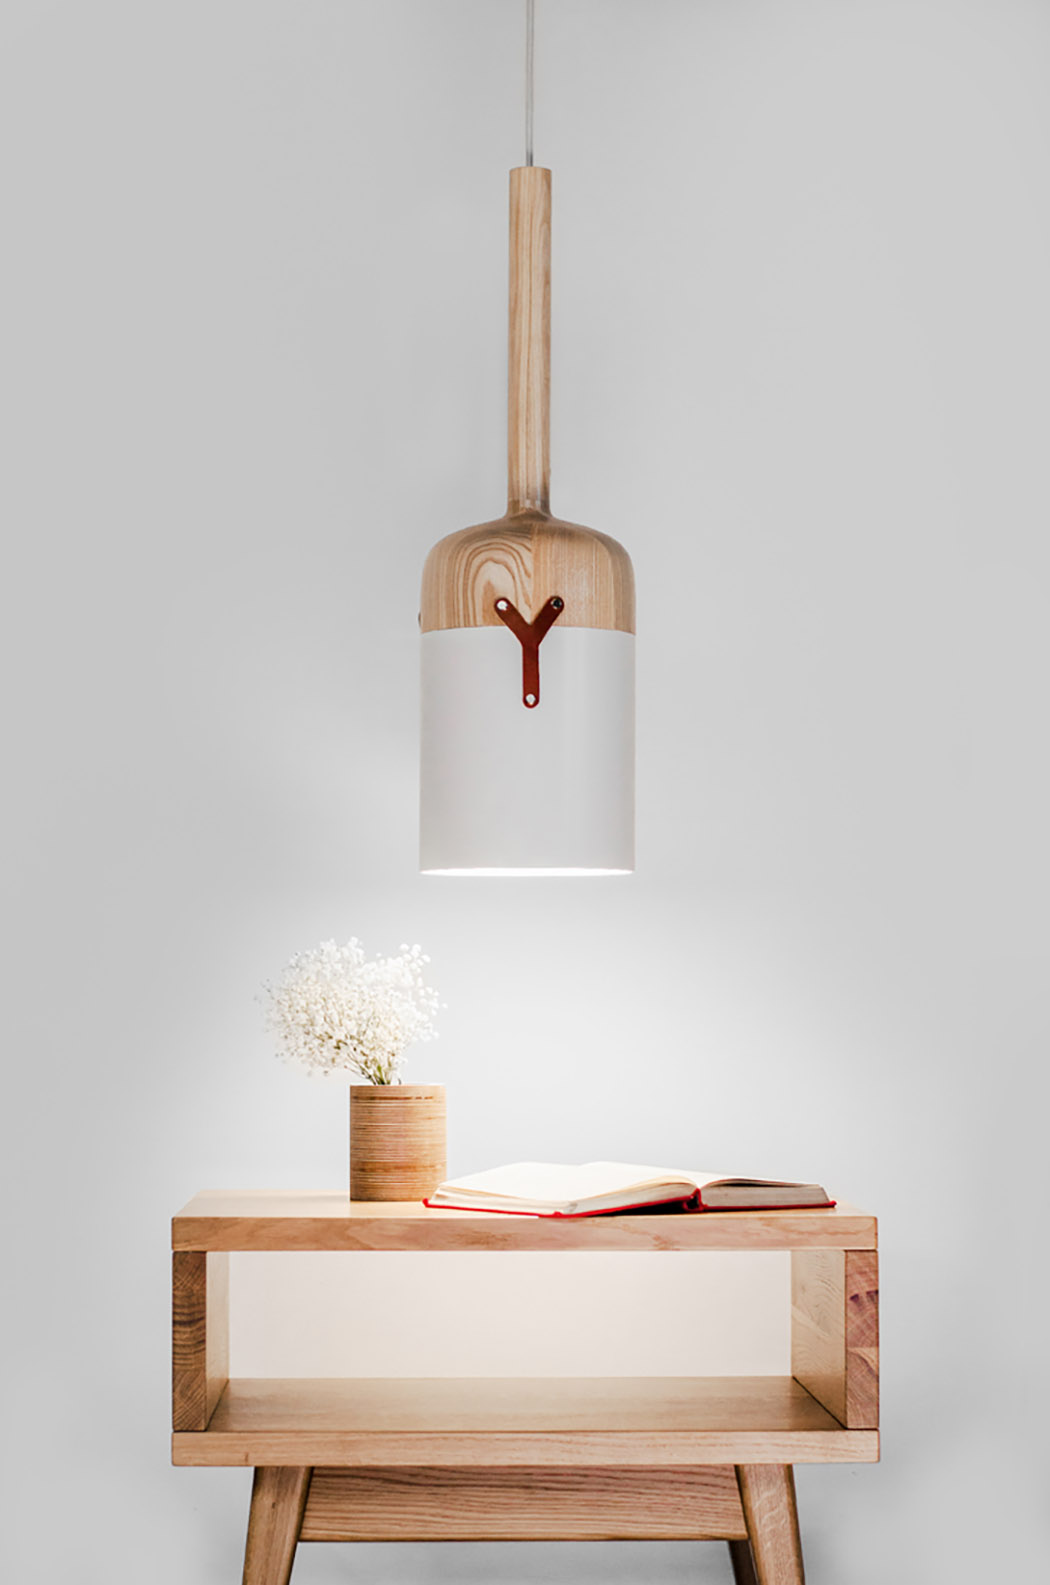 Nut C pendant lamp looks like Nut S but differs in size and a little bit in design, it's bigger